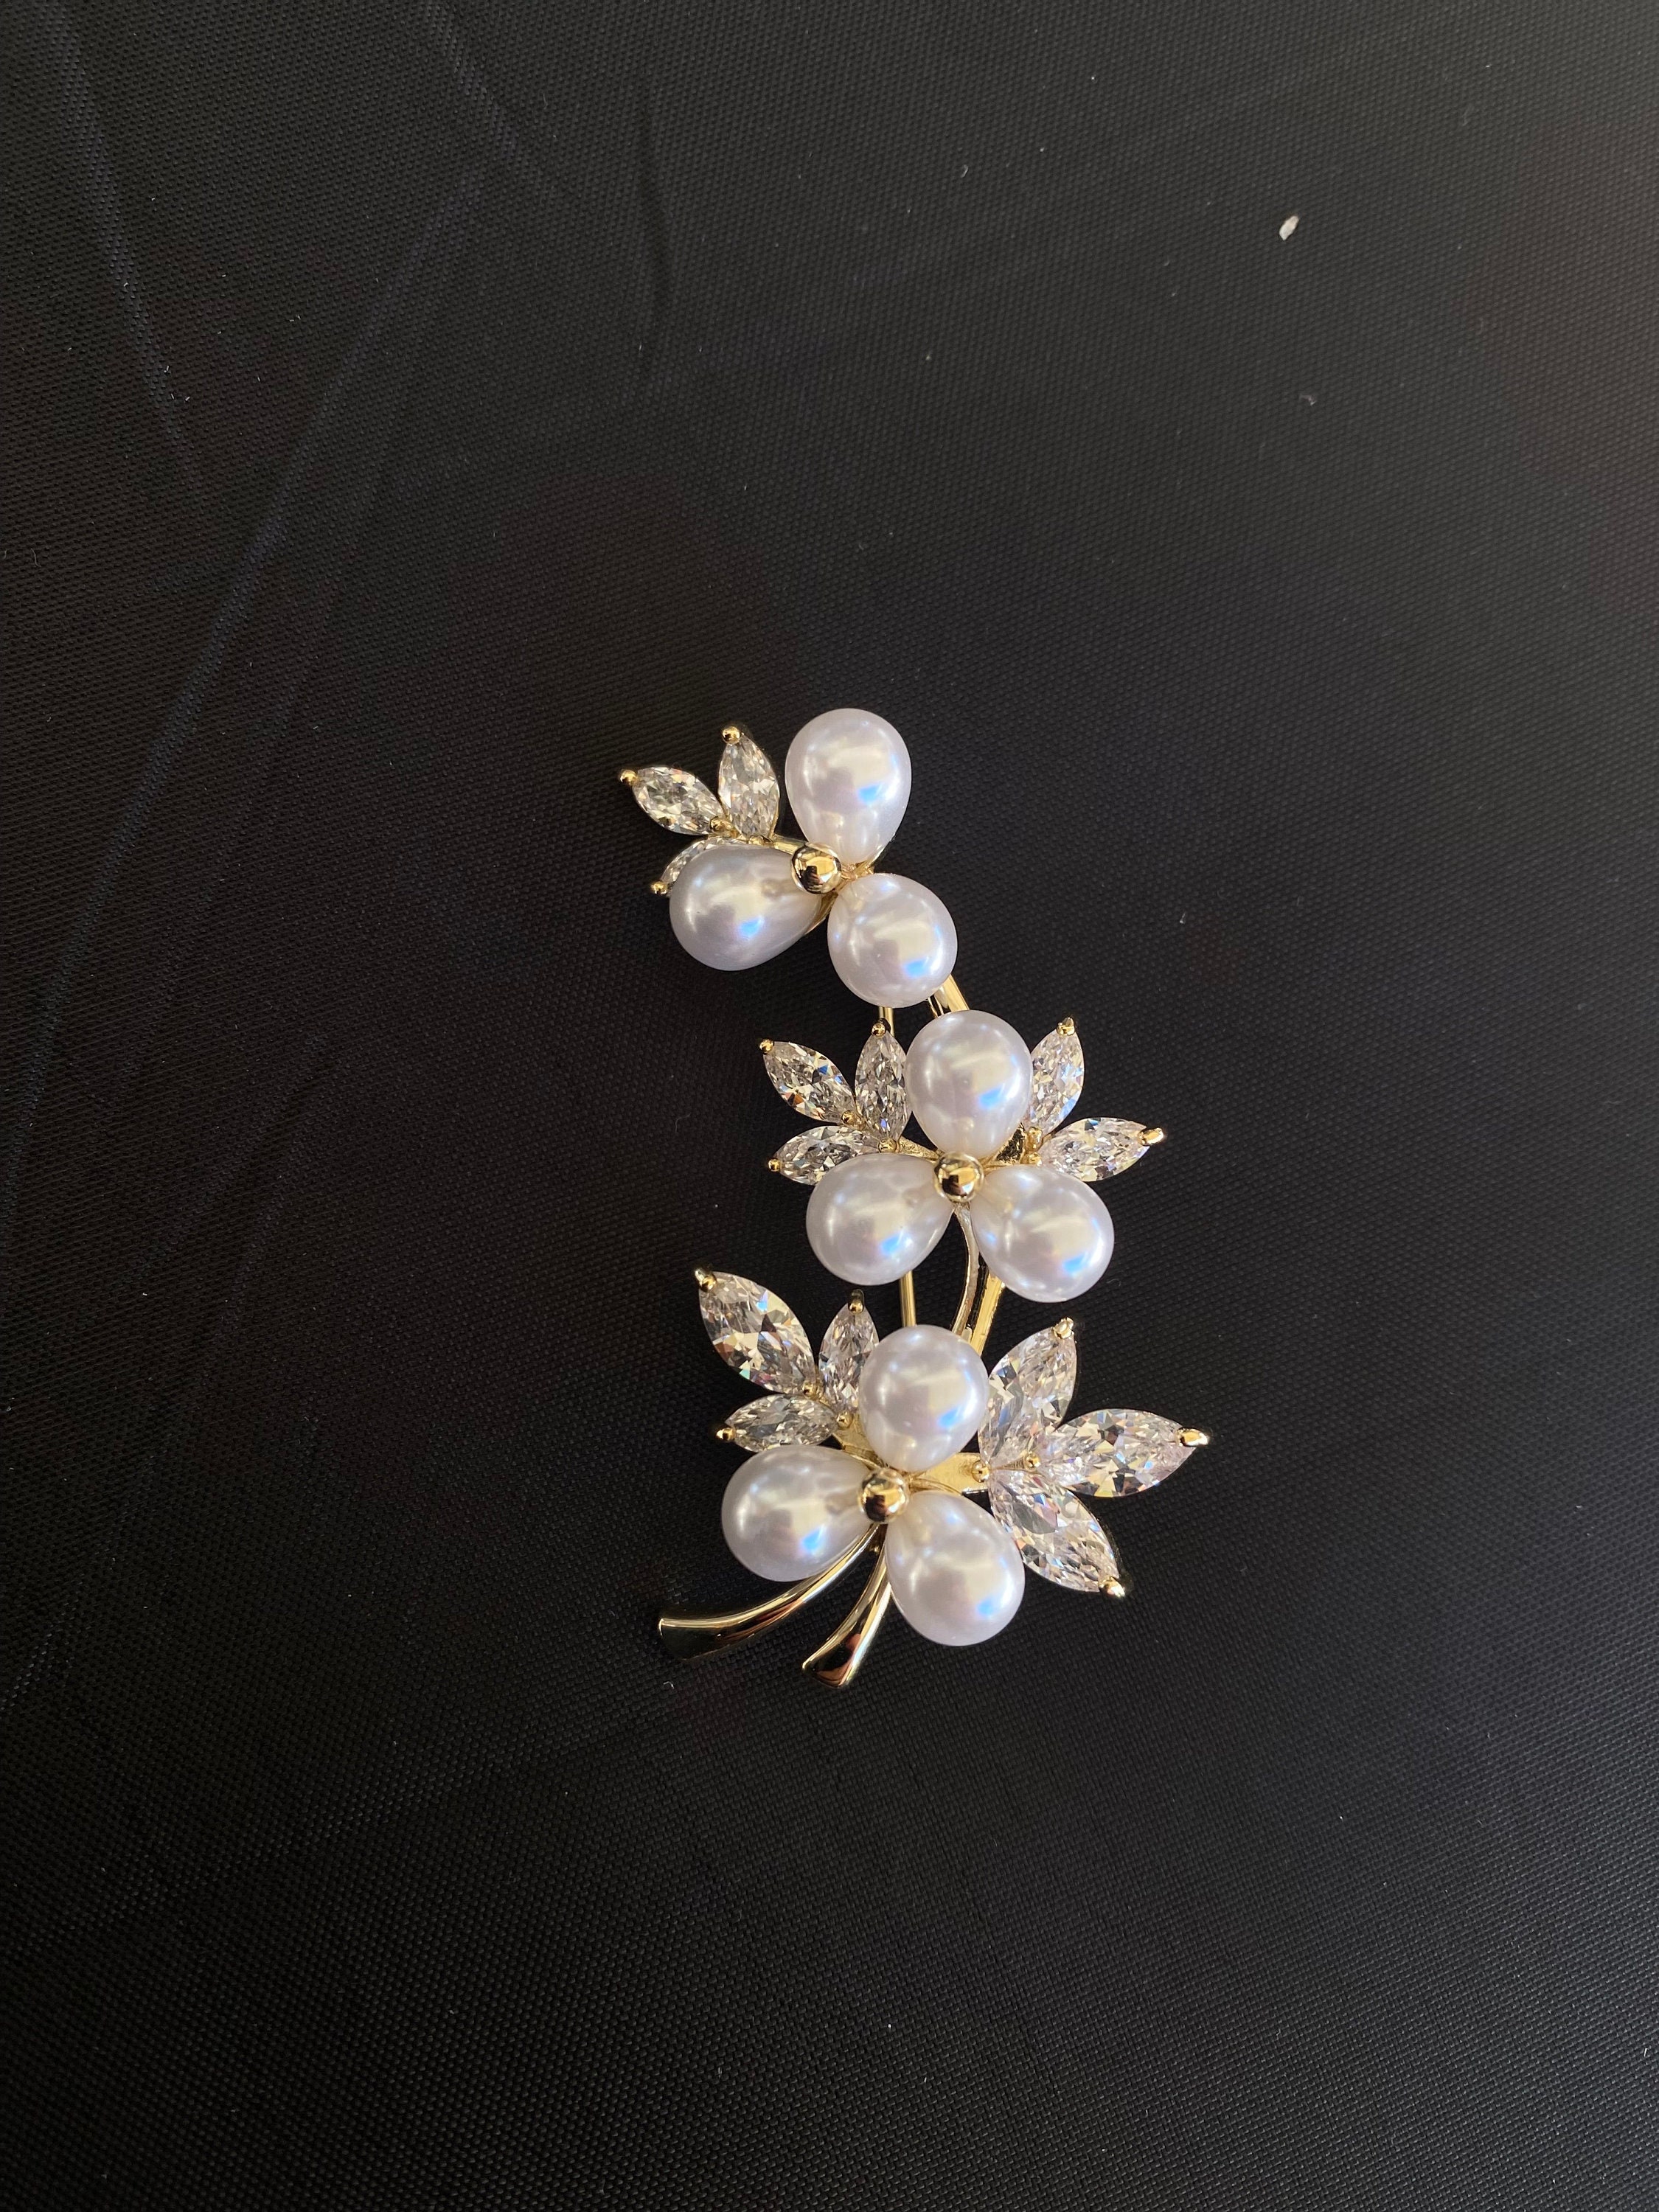 Elegant Brooches For Women - Luxury Pins and Chic Designs – BROOCHITON